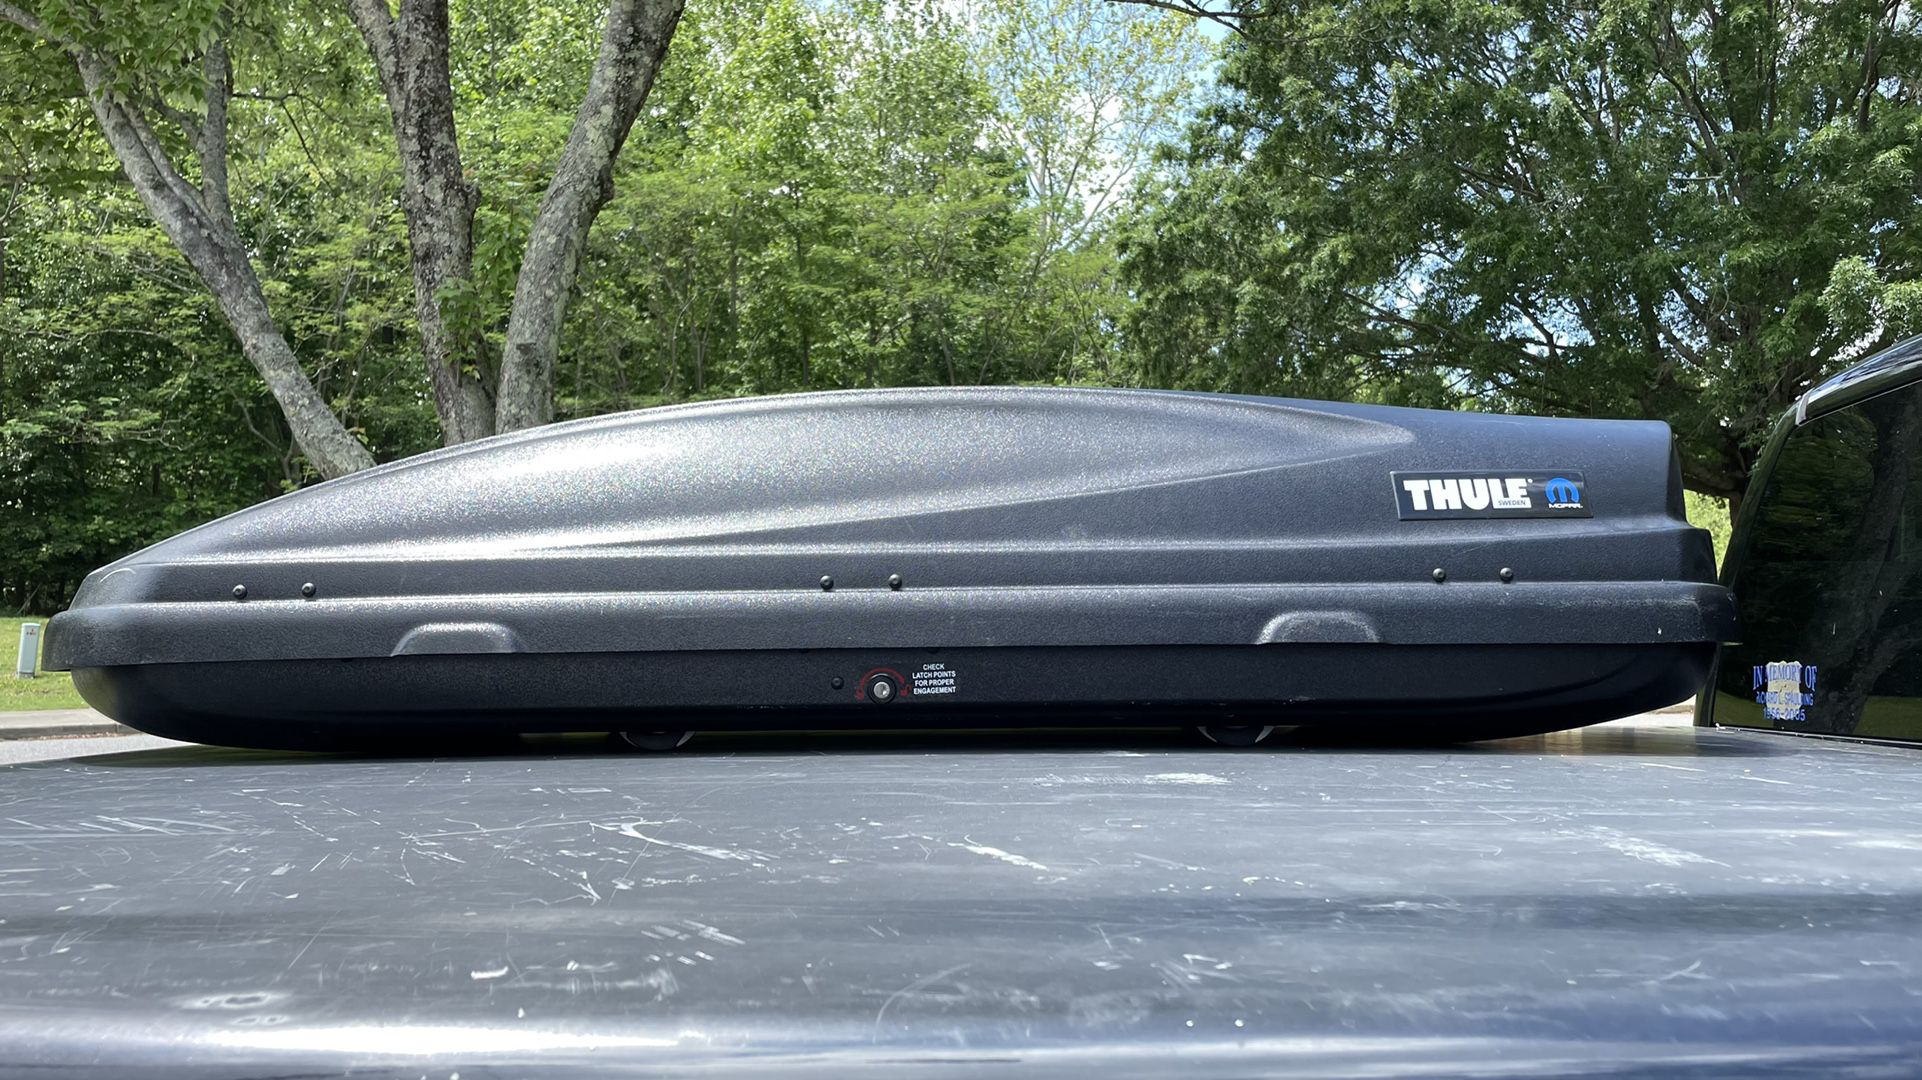 Thule Rooftop Cargo Carrier For Roof Racks Yakima Skybox Locking Travel Roof Box With Original Key